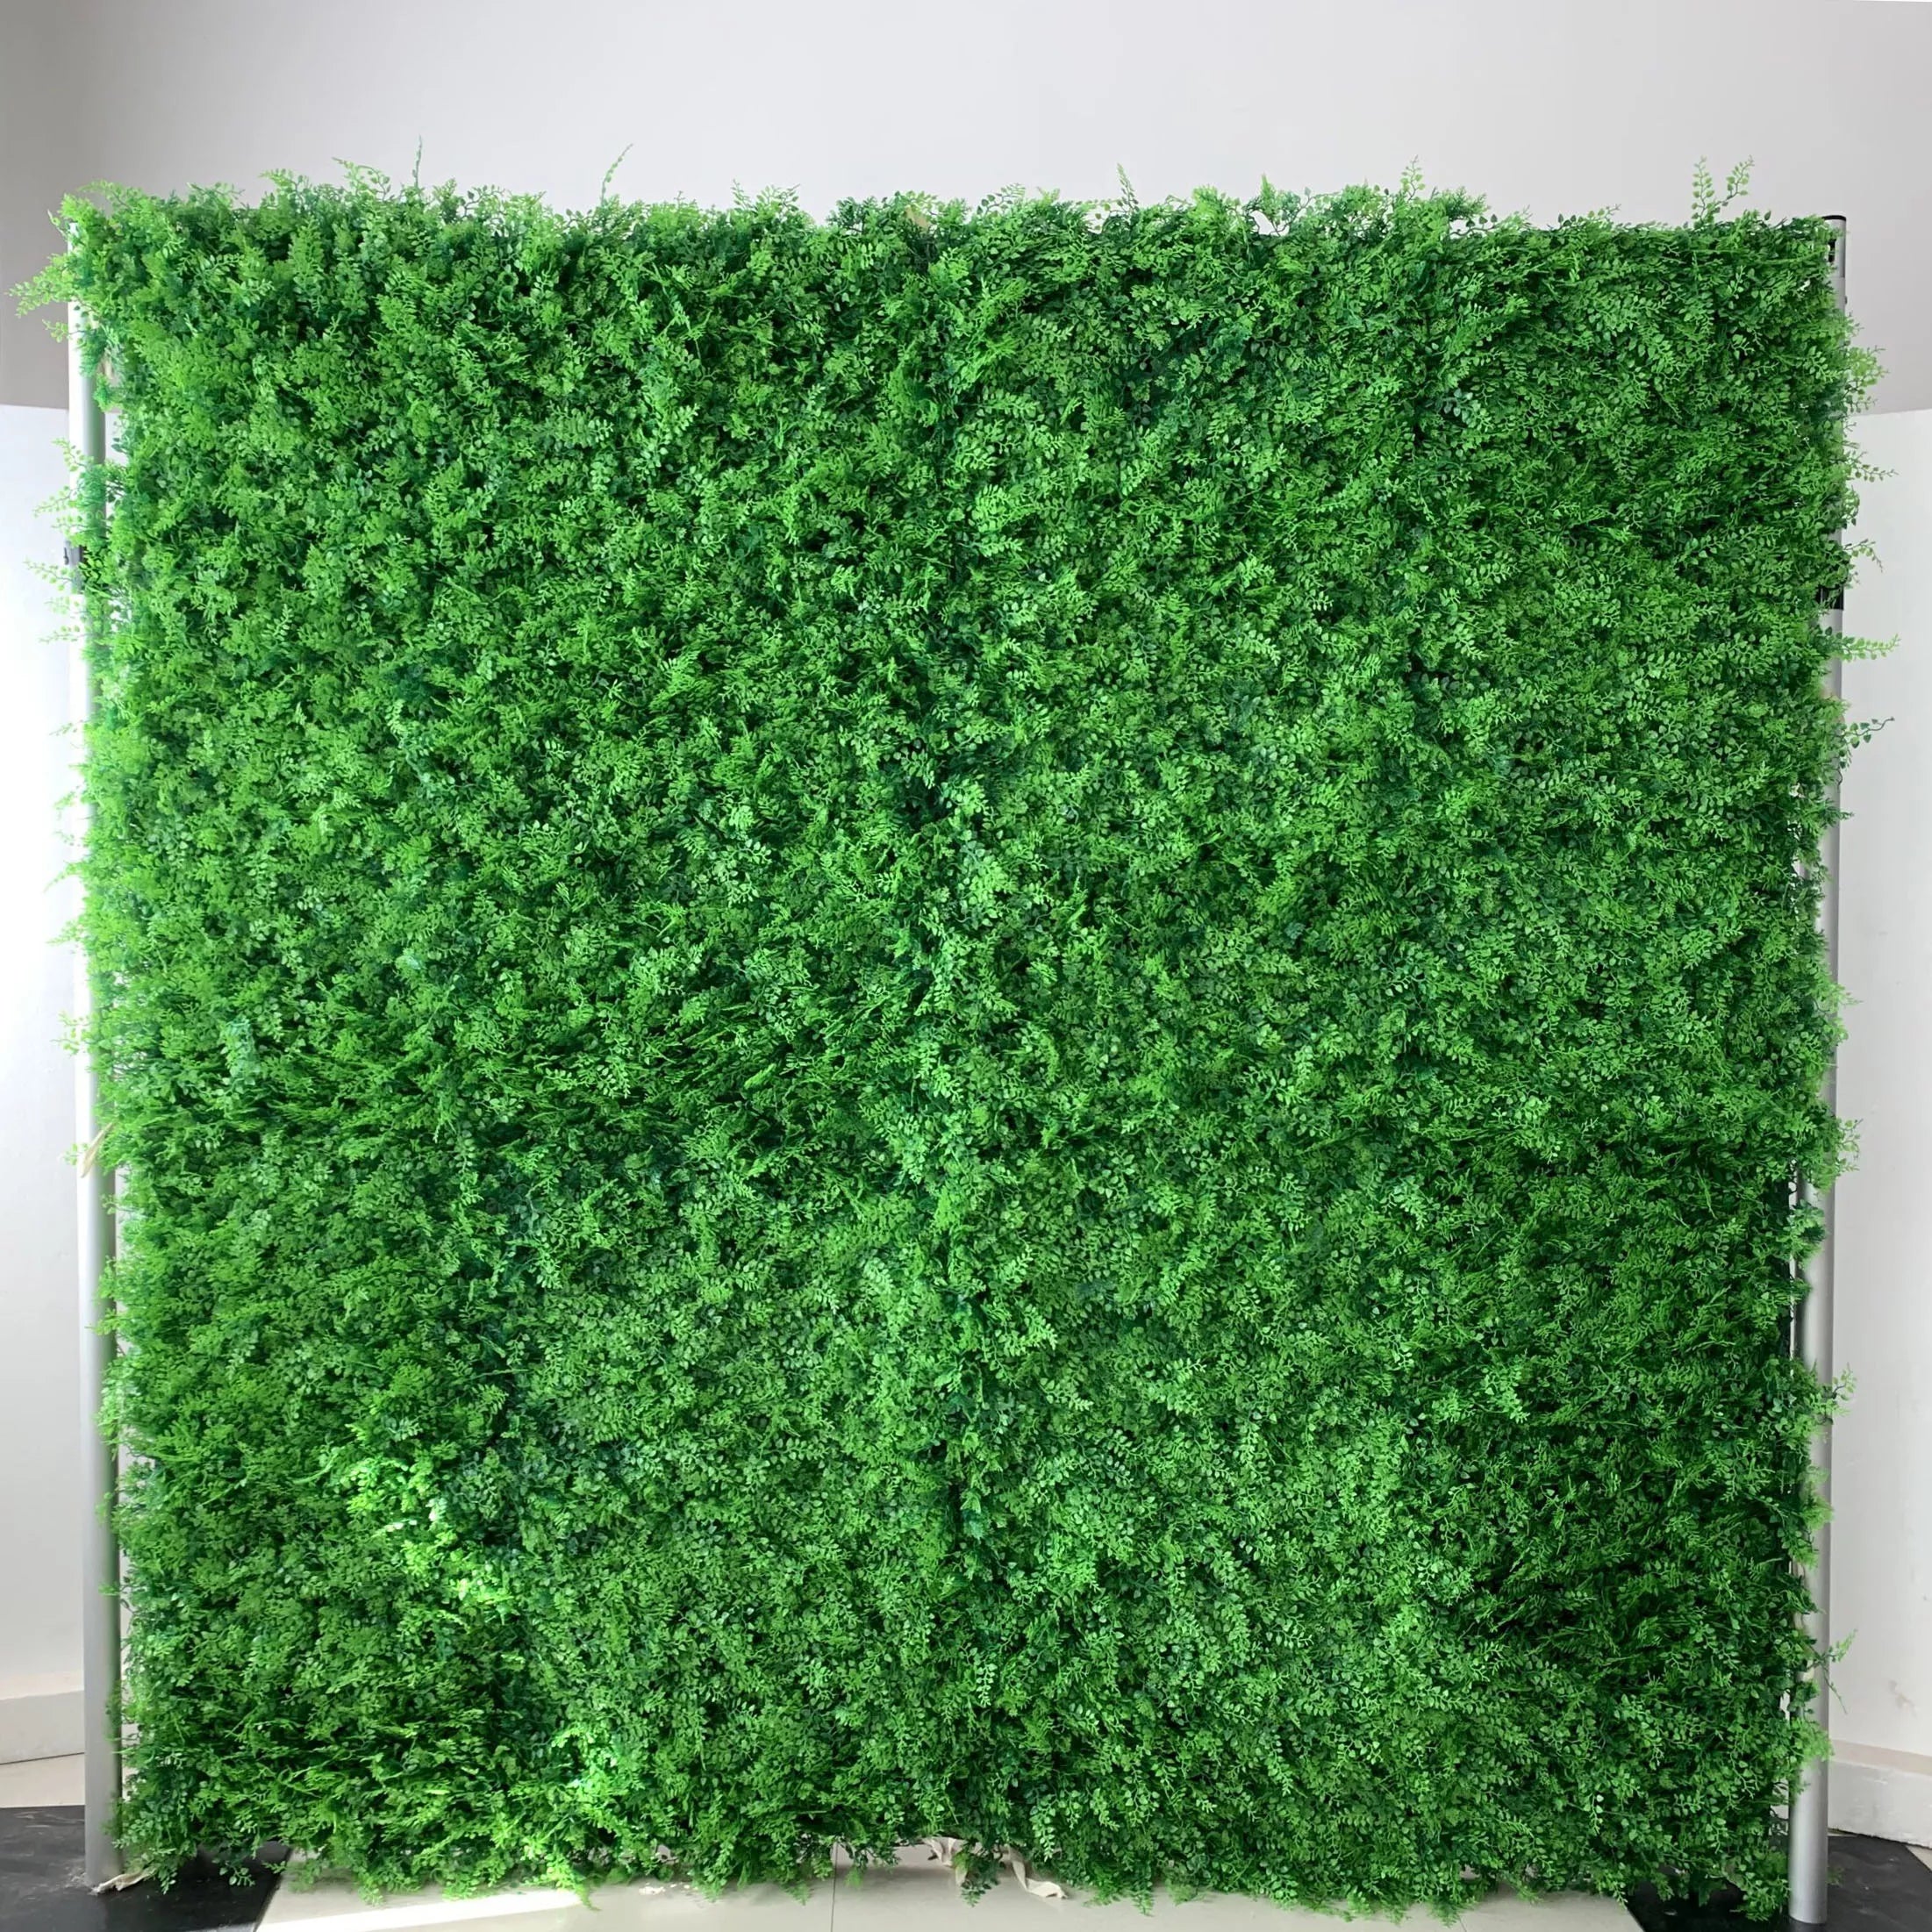 Valar Flowers Roll Up Fabric Artificial Vivid Green Grass Wall Wedding Backdrop, Floral Party Decor, Event Photography-VF-086-2